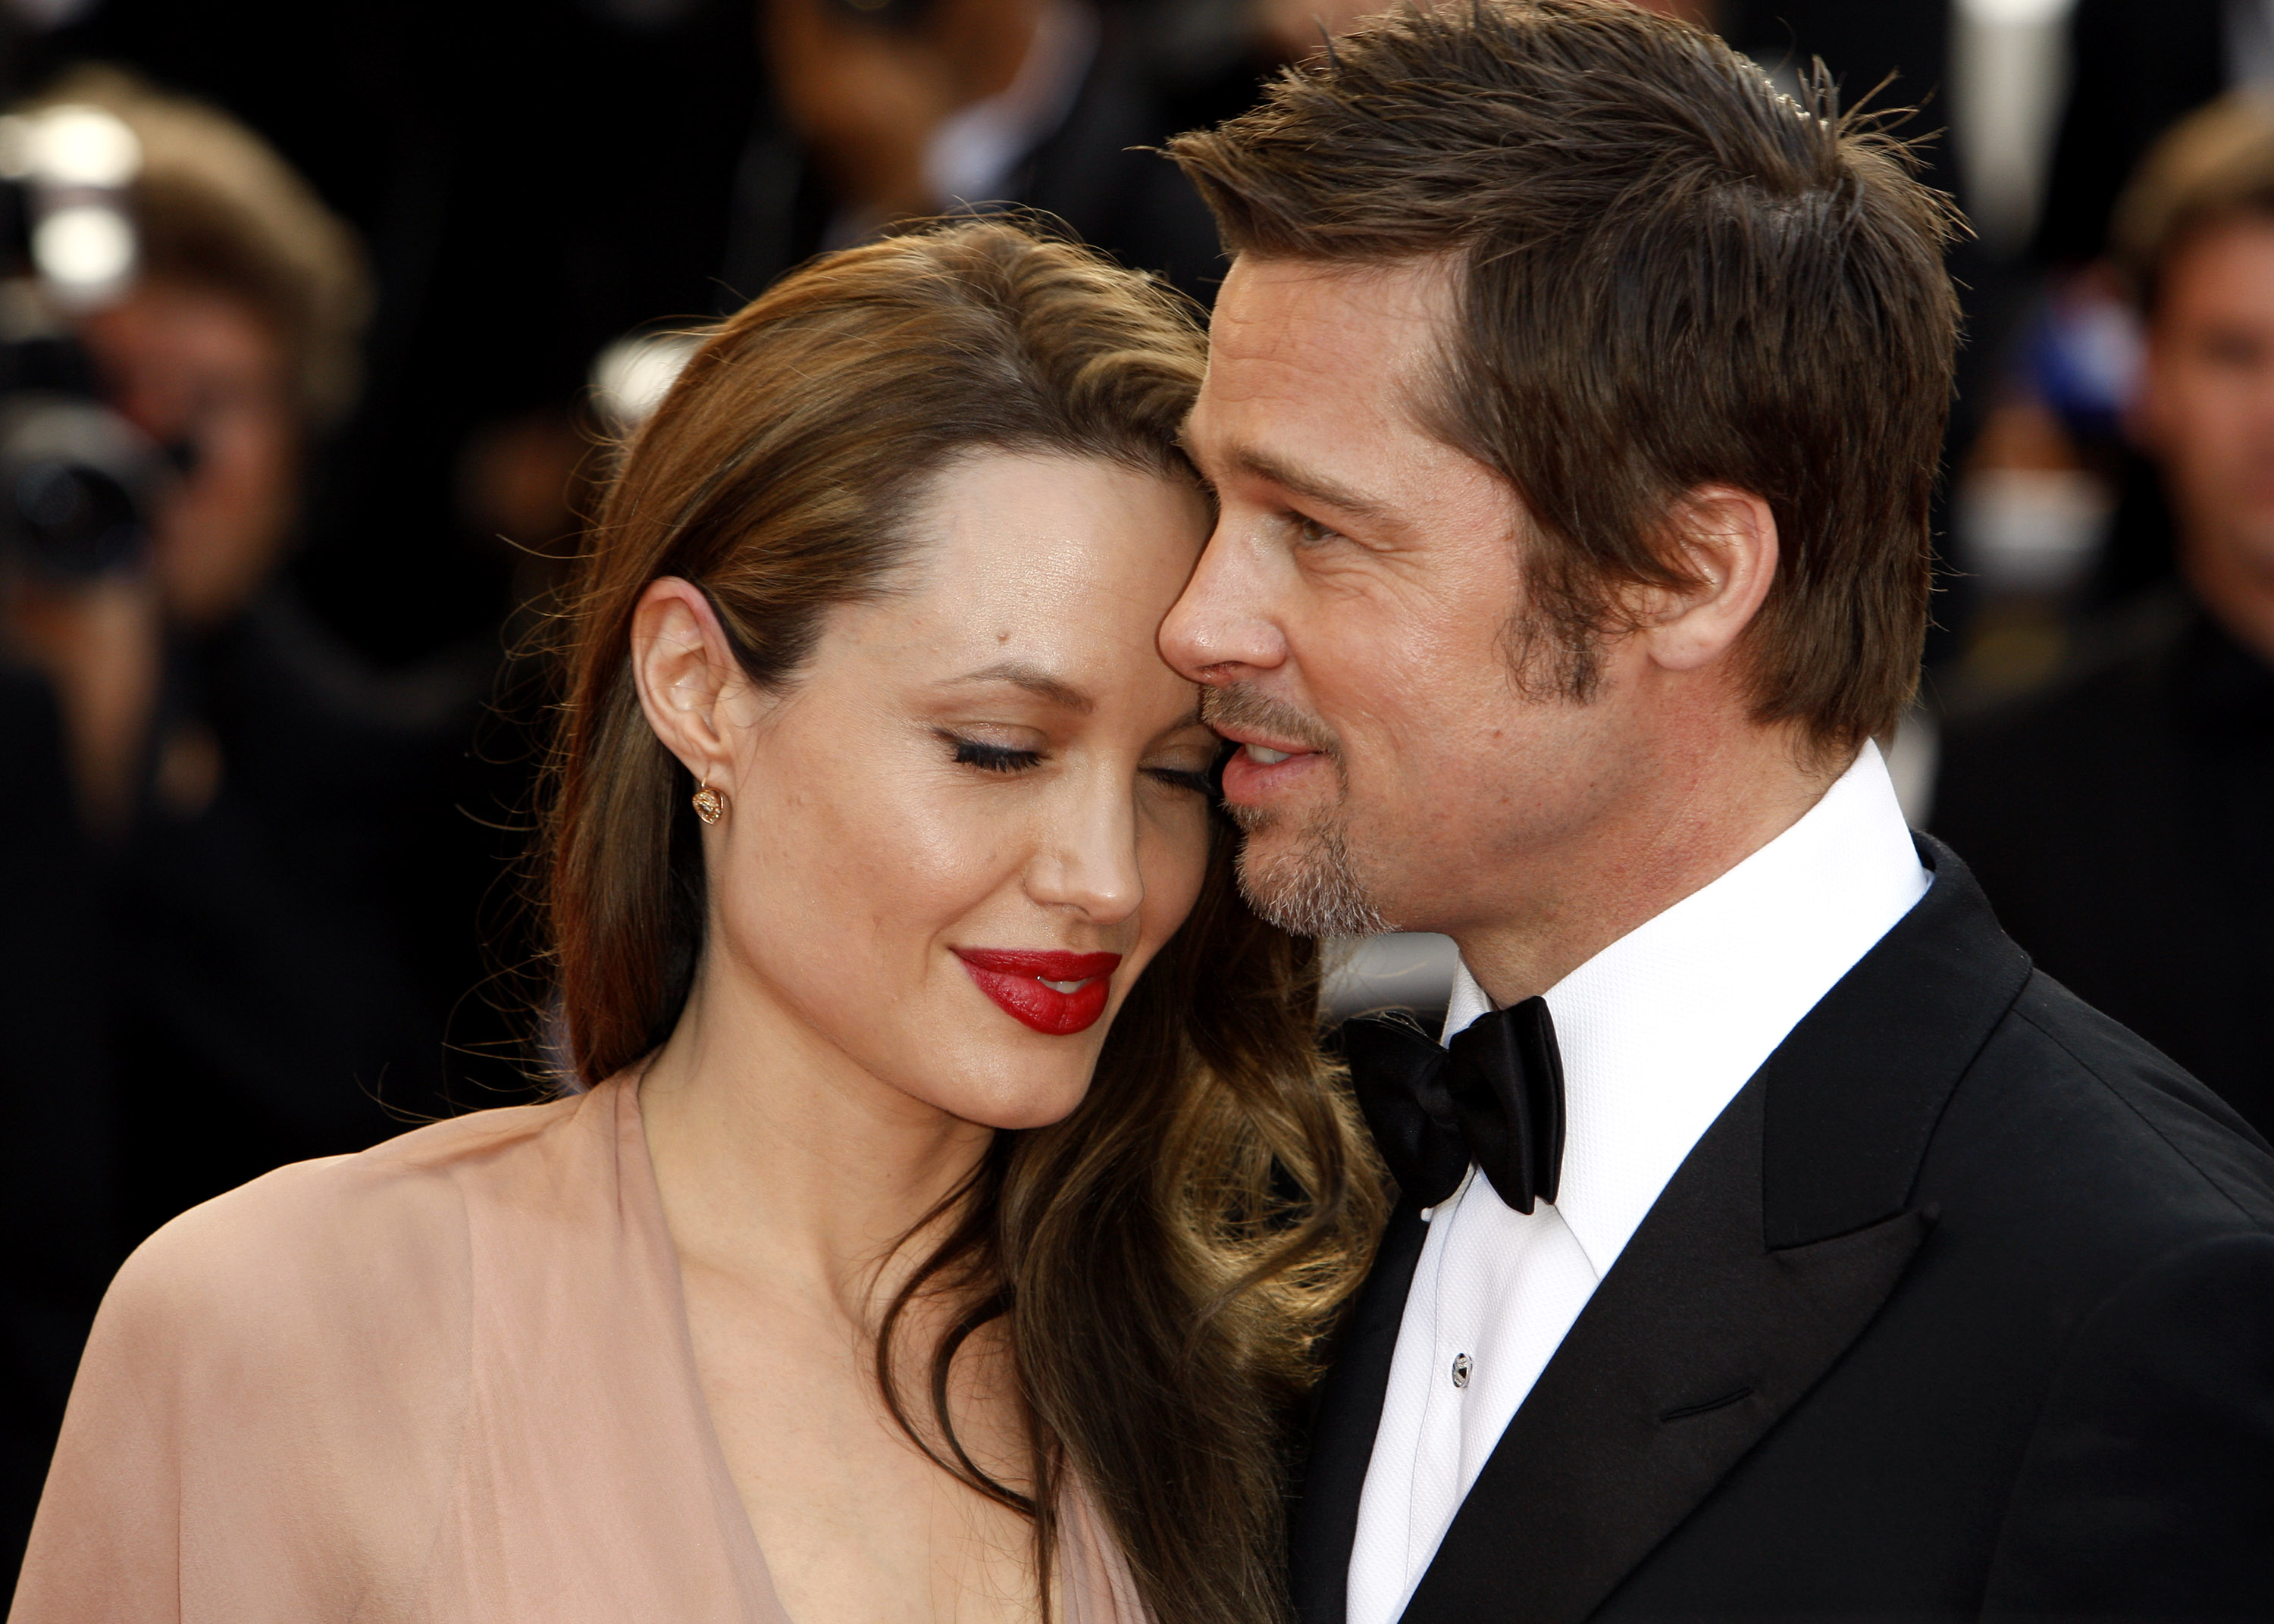 Angelina Jolie and Brad Pitt on May 20, 2009 in Cannes, France. | Source: Getty Images